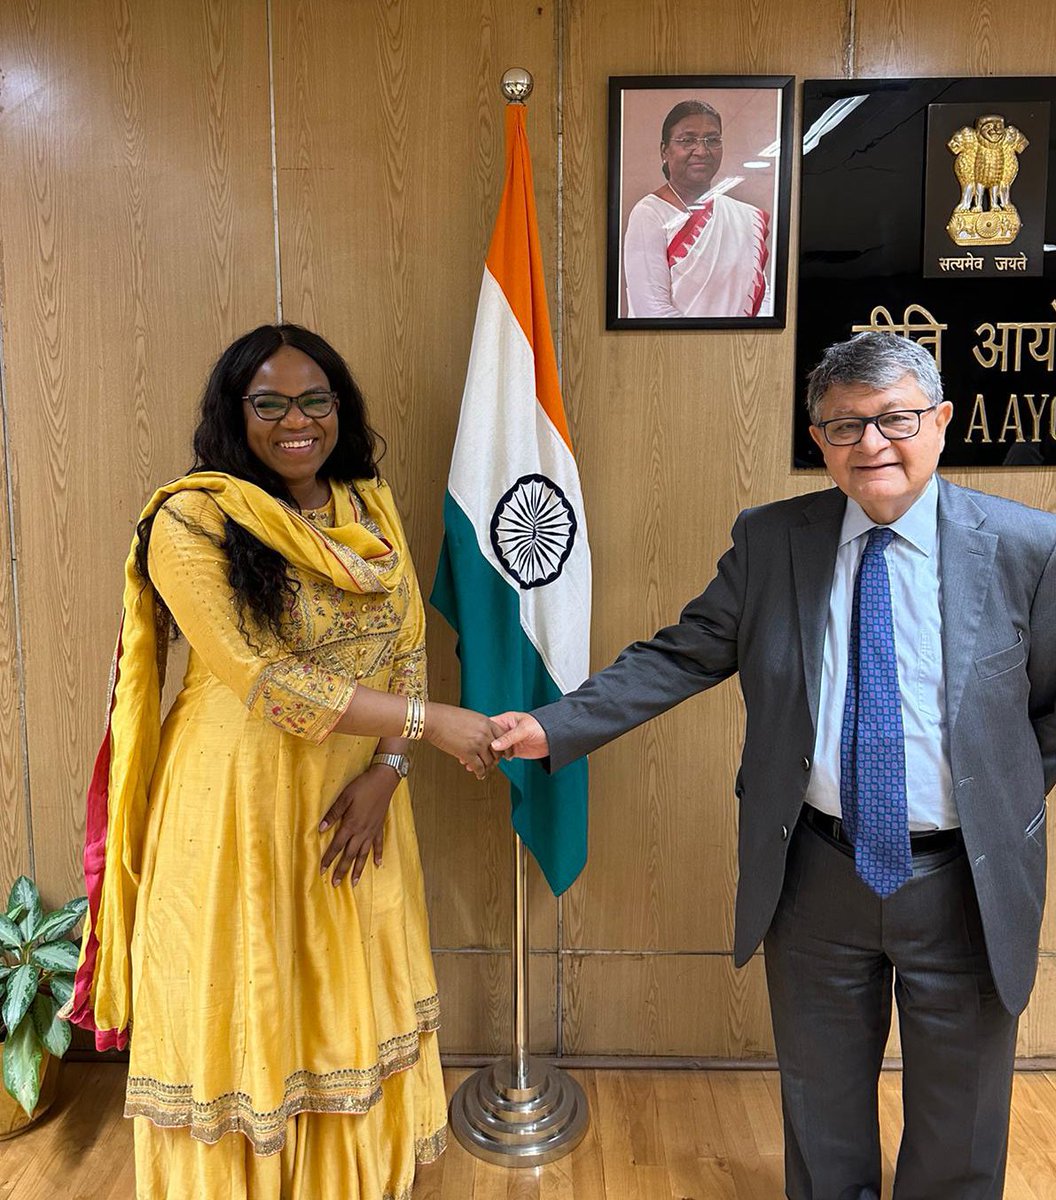 Good meeting with @NITIAayog’s Vice Chairman @suman_bery. We discussed the work of @SEforALLorg as well as India’s leadership in advancing the #EnergyTransition. 🇮🇳